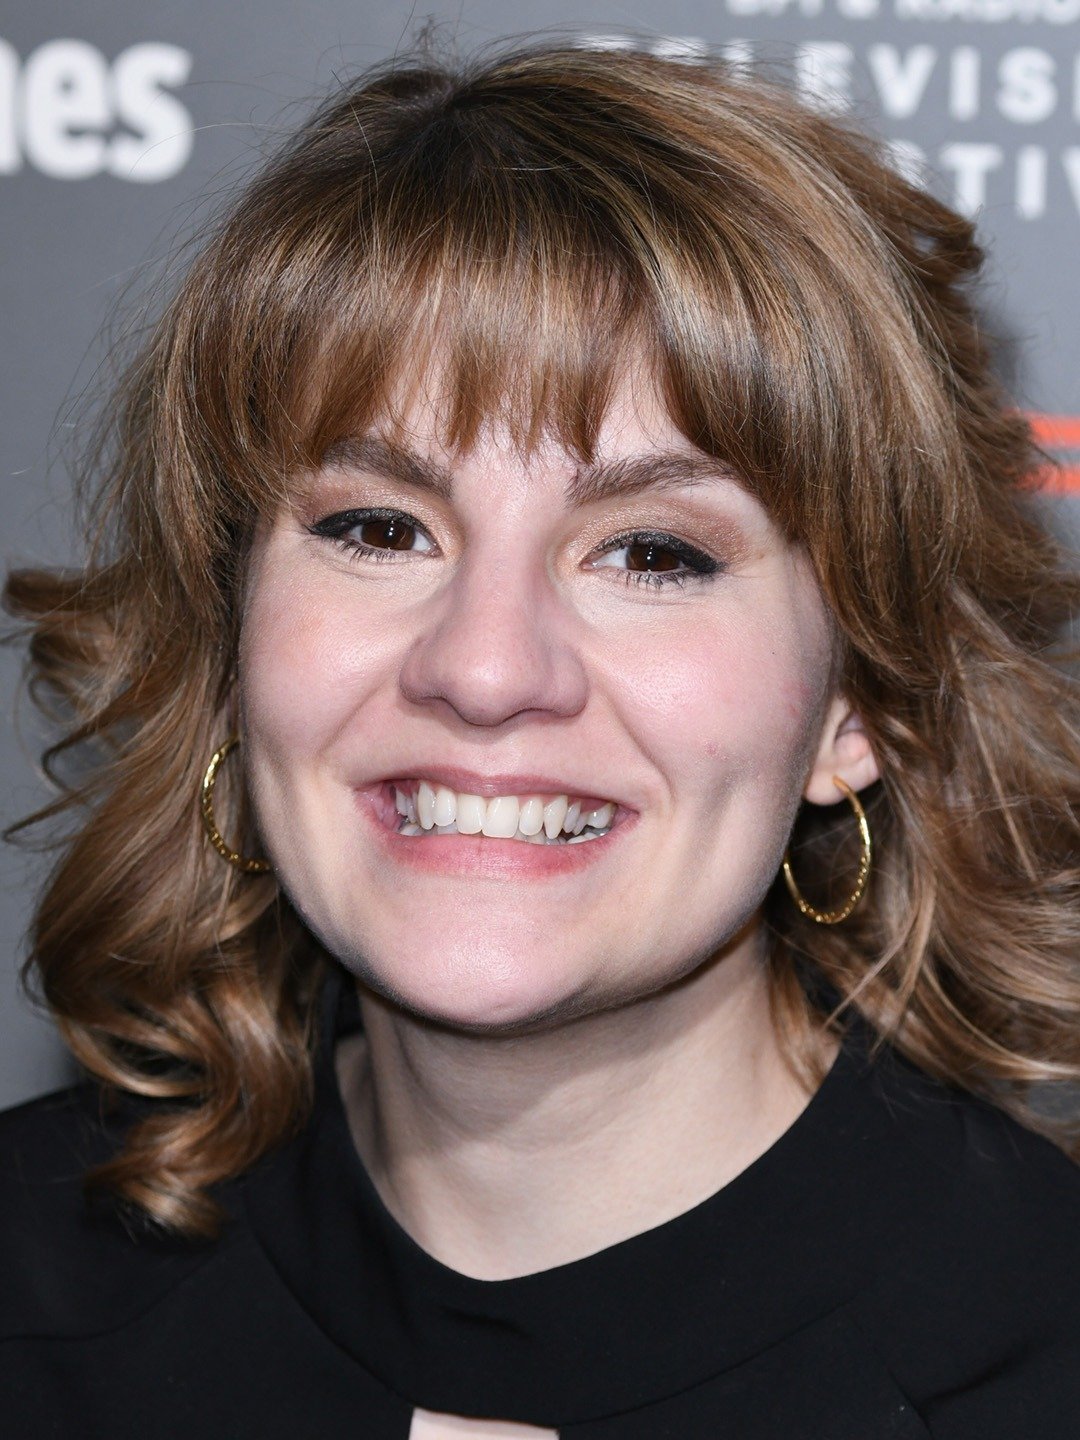 Is Actress Ruth Madeley Married To Joe Lawrence?